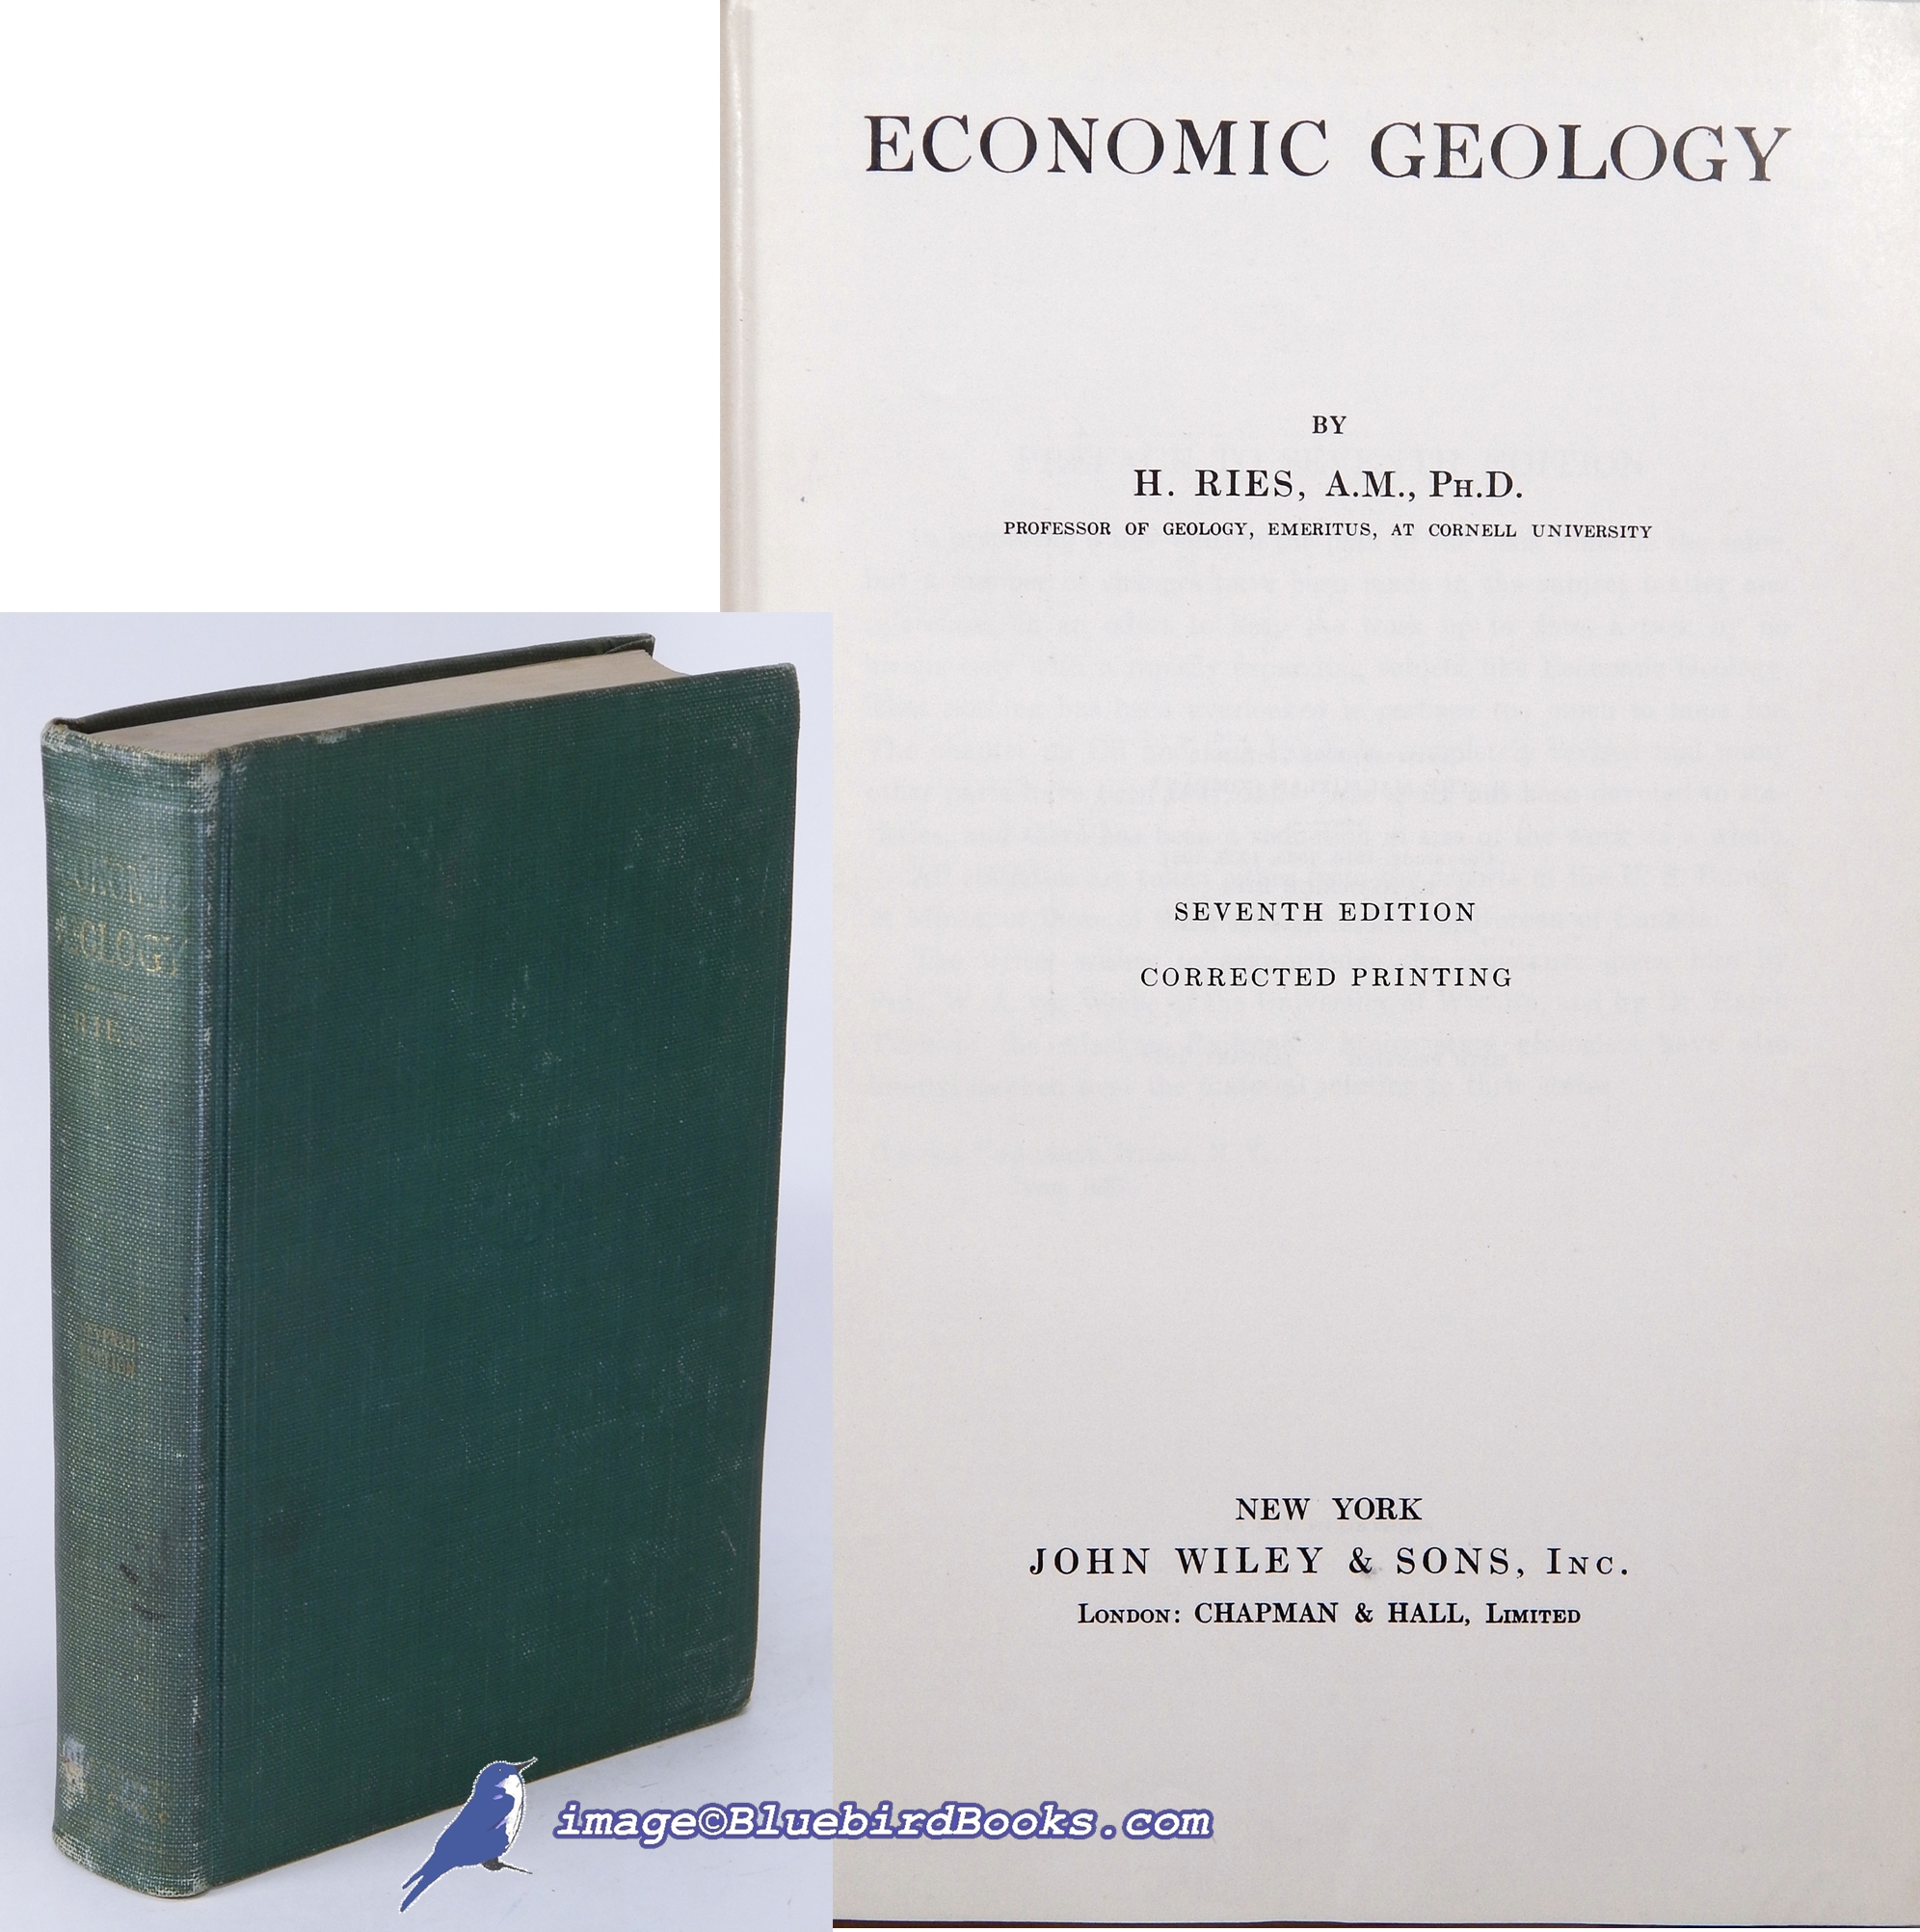 RIES, PROFESSOR H. - Economic Geology: Seventh Edition, Corrected Printing